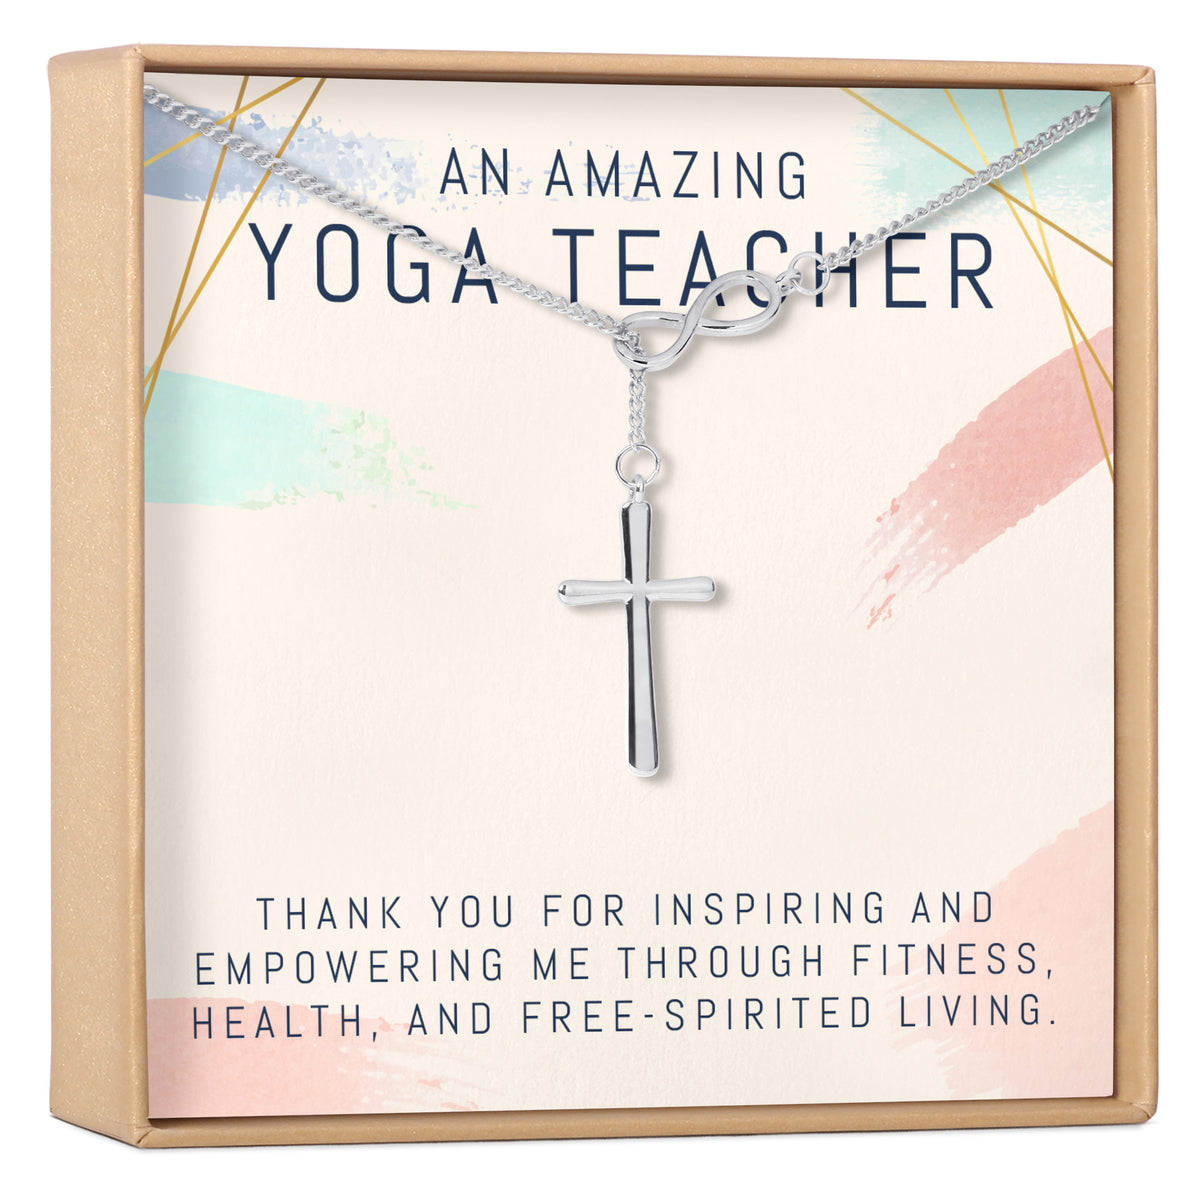 Gift for Yoga Teacher: Jewelry Present for Mindfulness Mentor, Health  Coach, and Your Favorite Personal Yoga Instructor, Multiple Necklace Styles  - Dear Ava